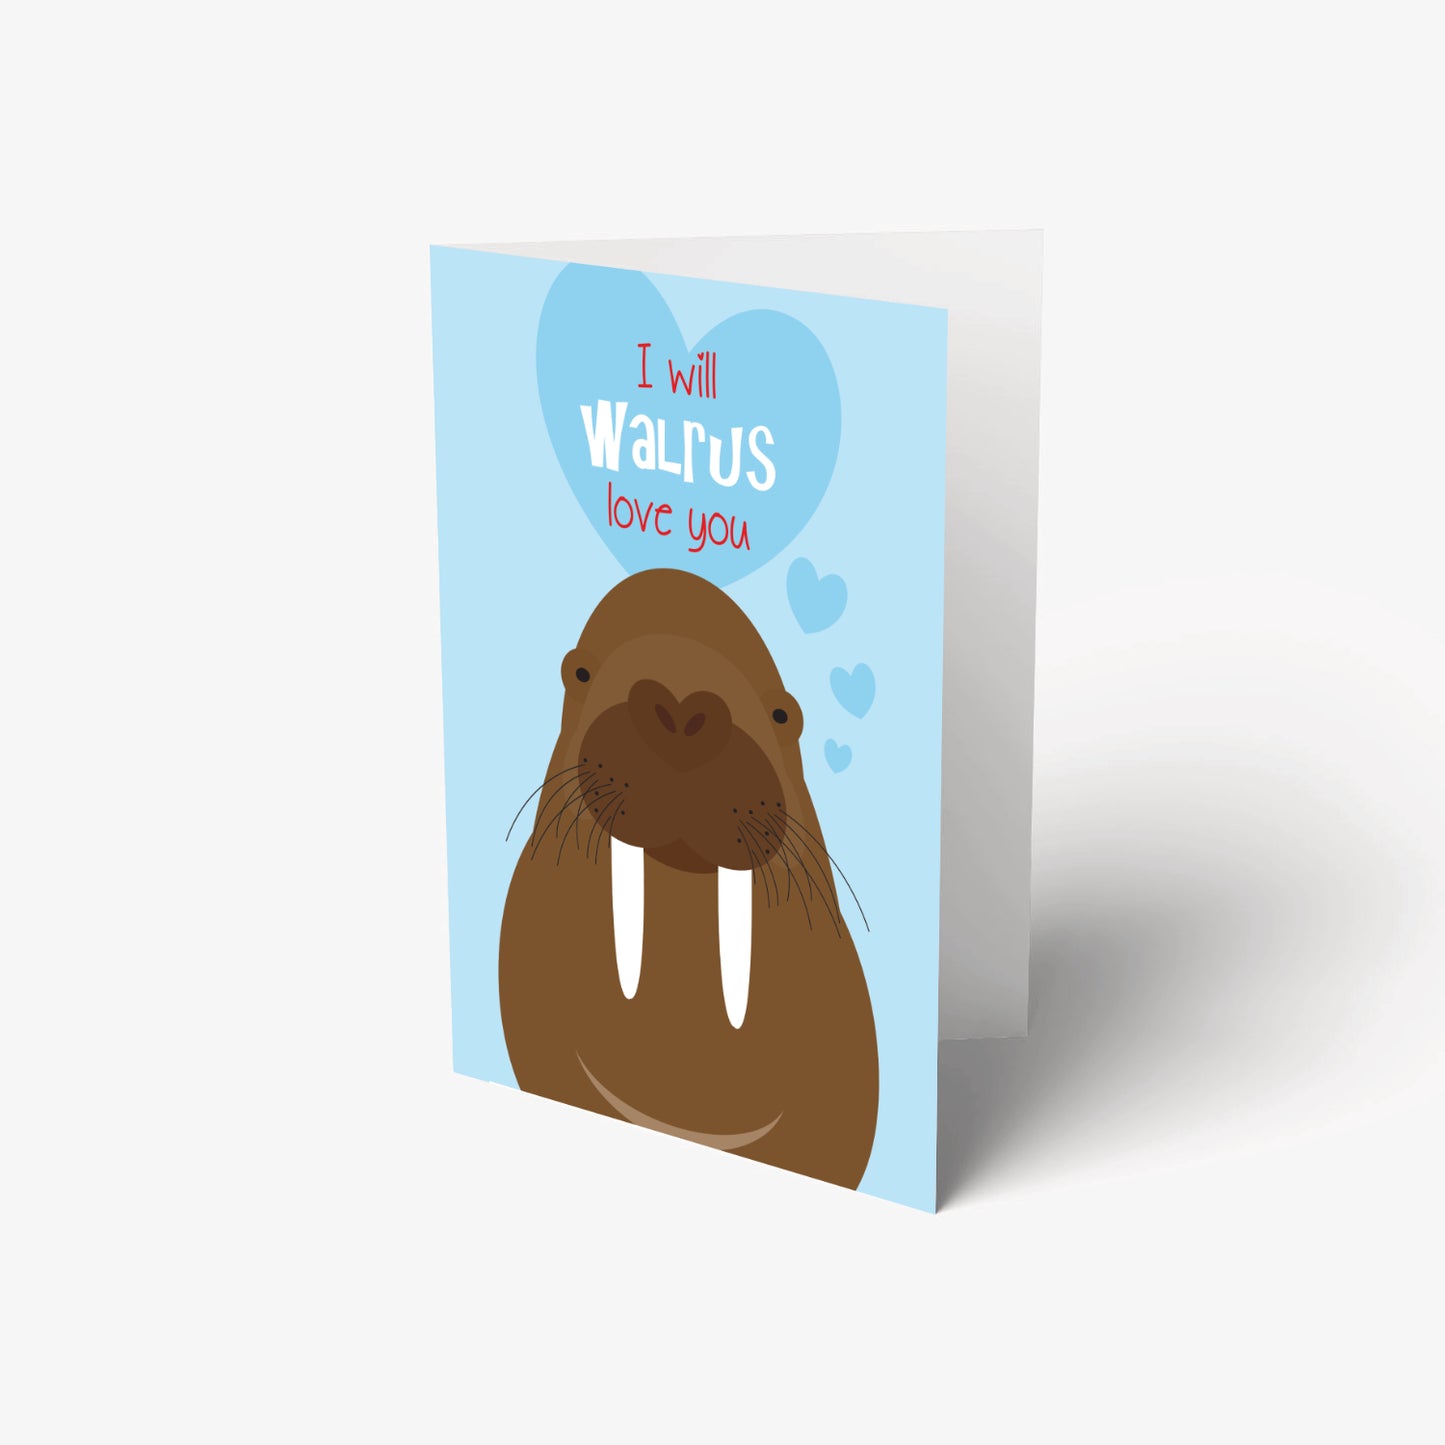 Walrus love you valentines card